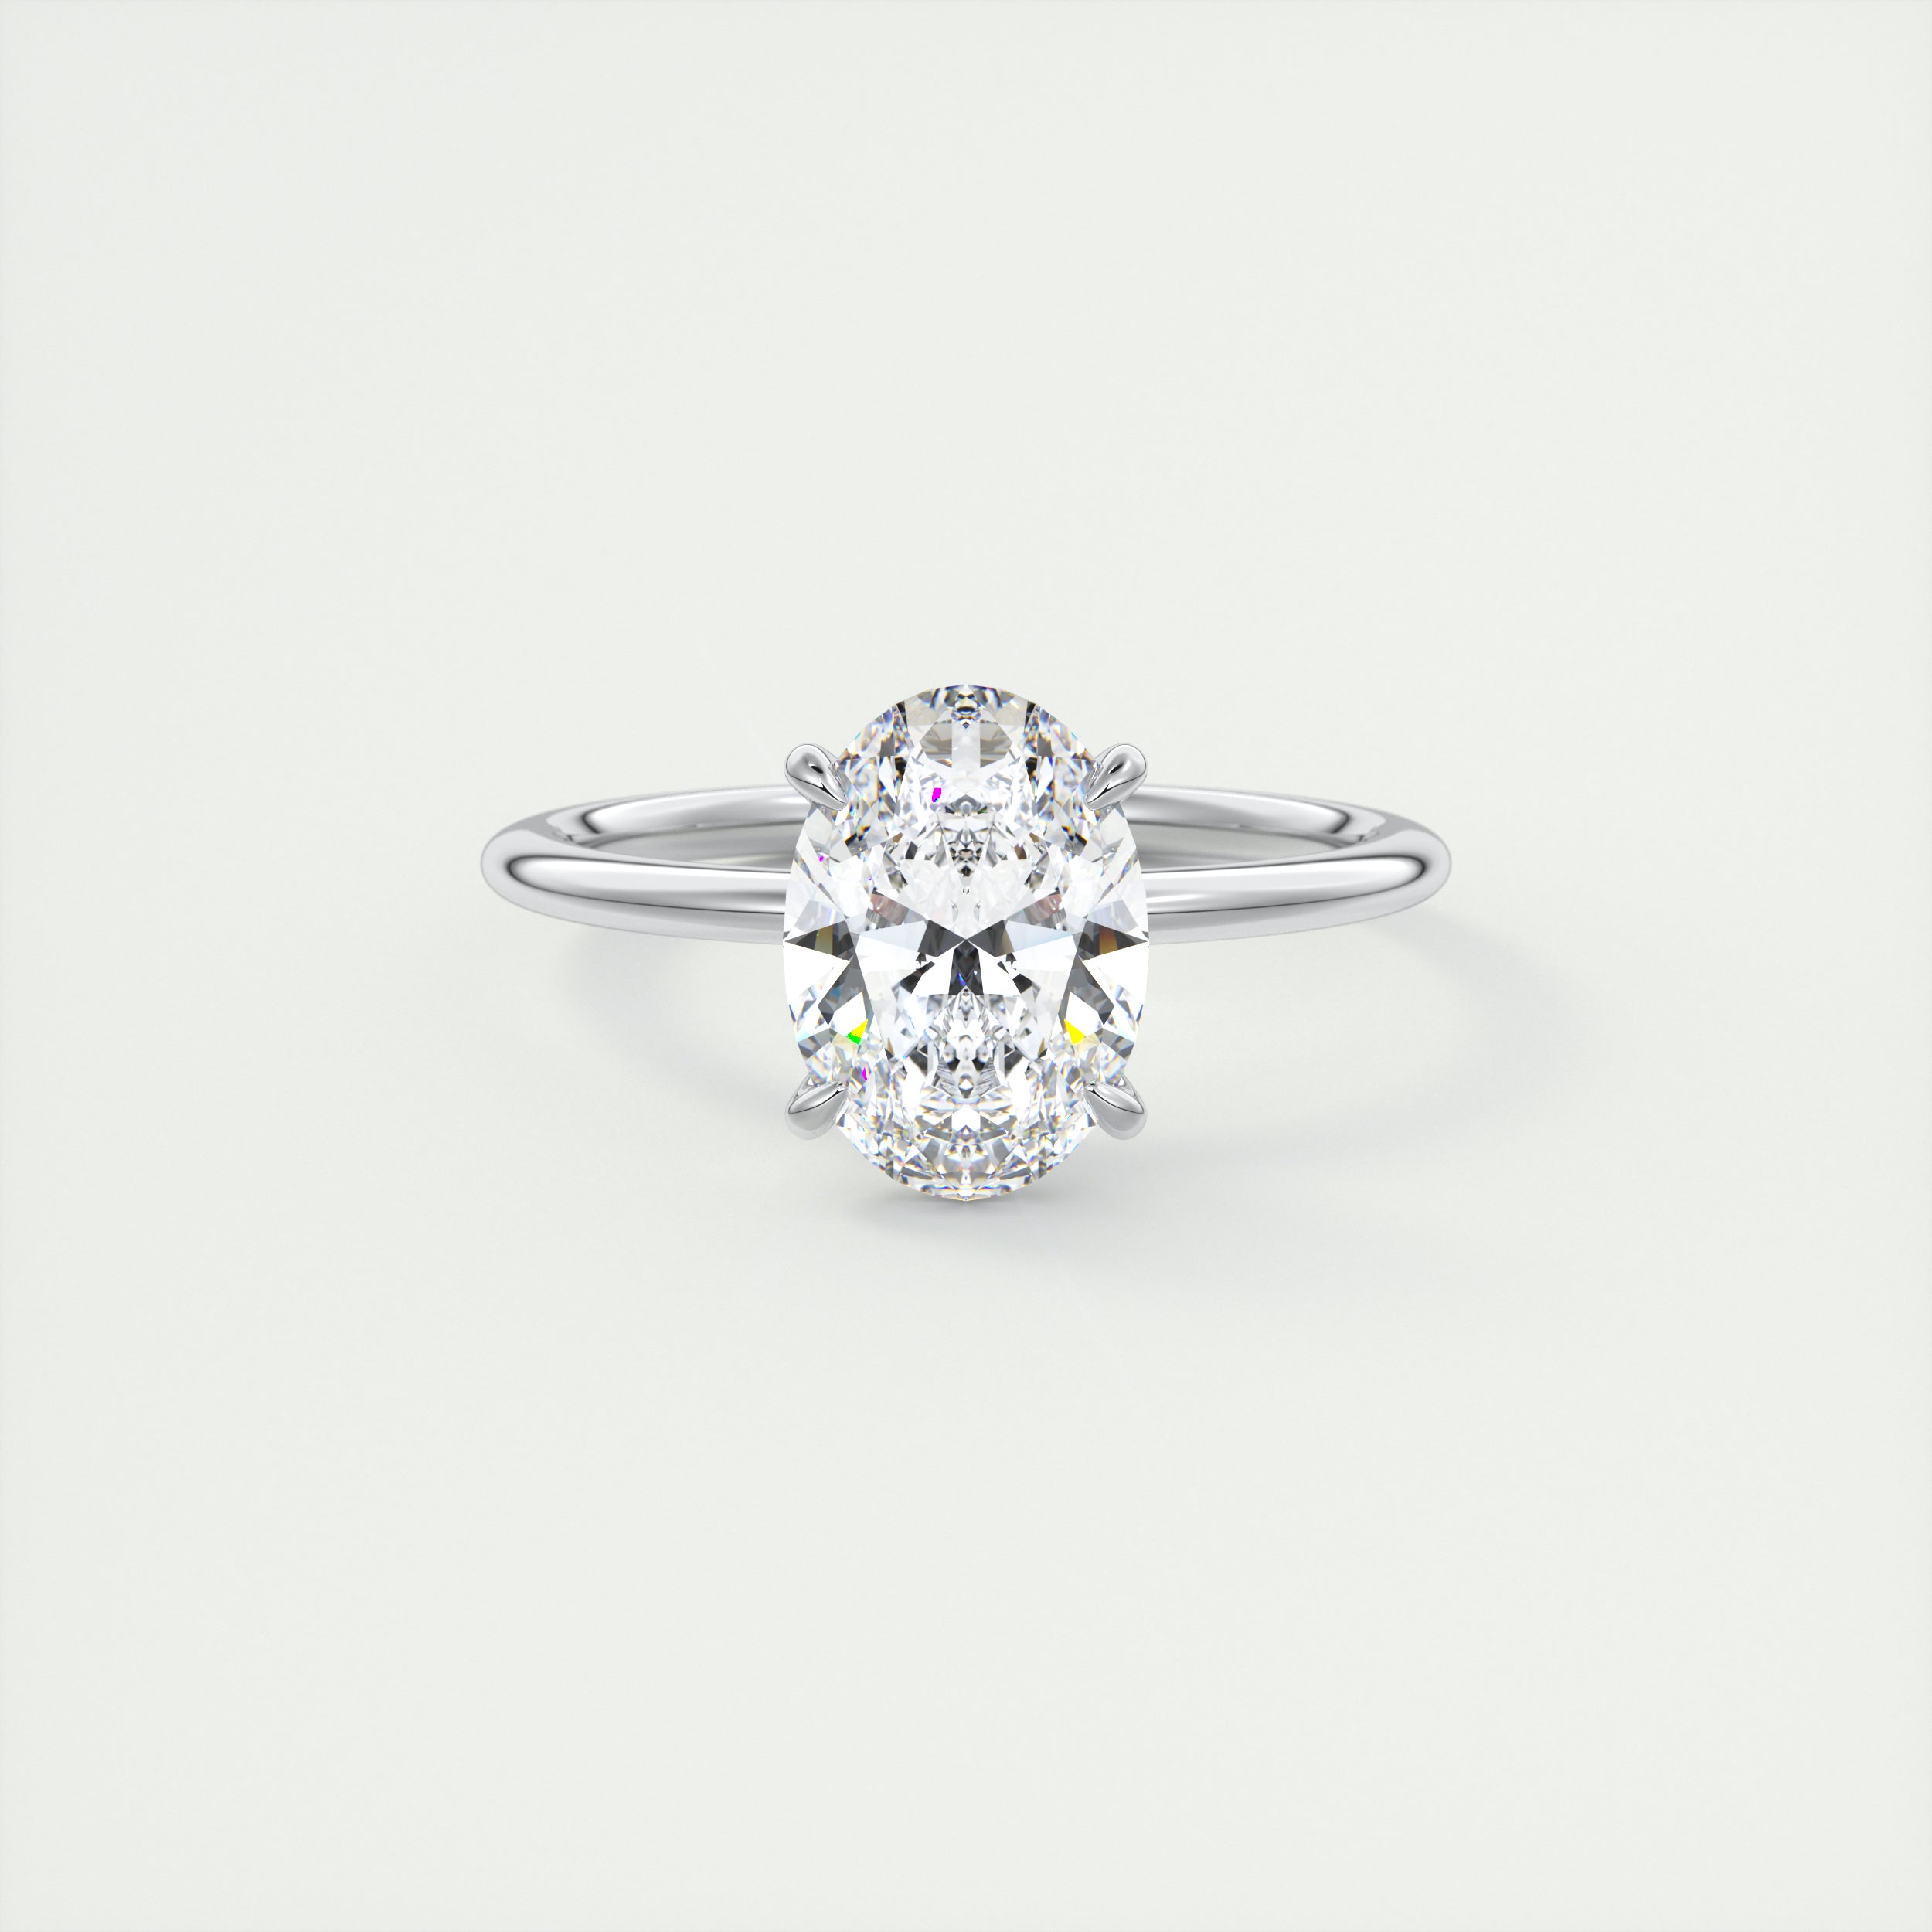 oval 4 claw prong solitaire classic frank darling engagement ring solitaire platinum